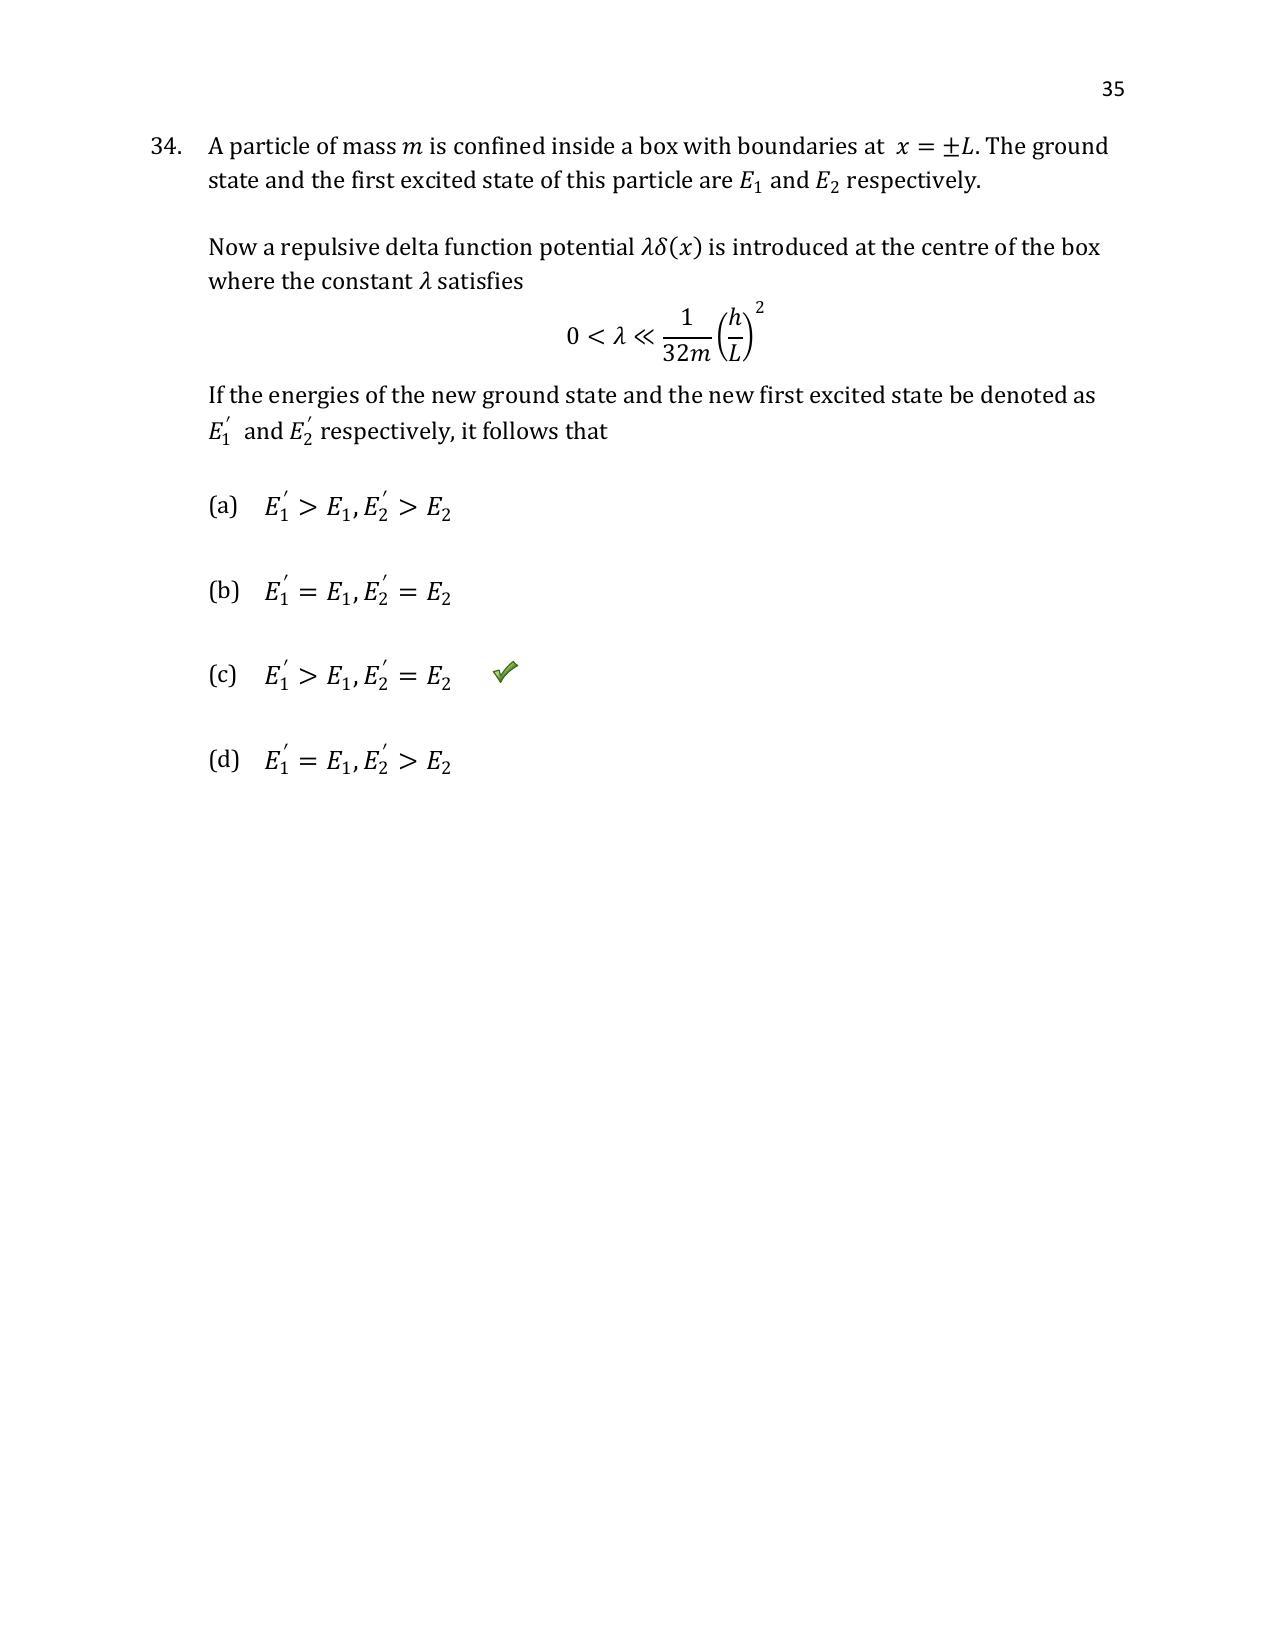 TIFR GS 2020 Physics Question Paper - Page 36